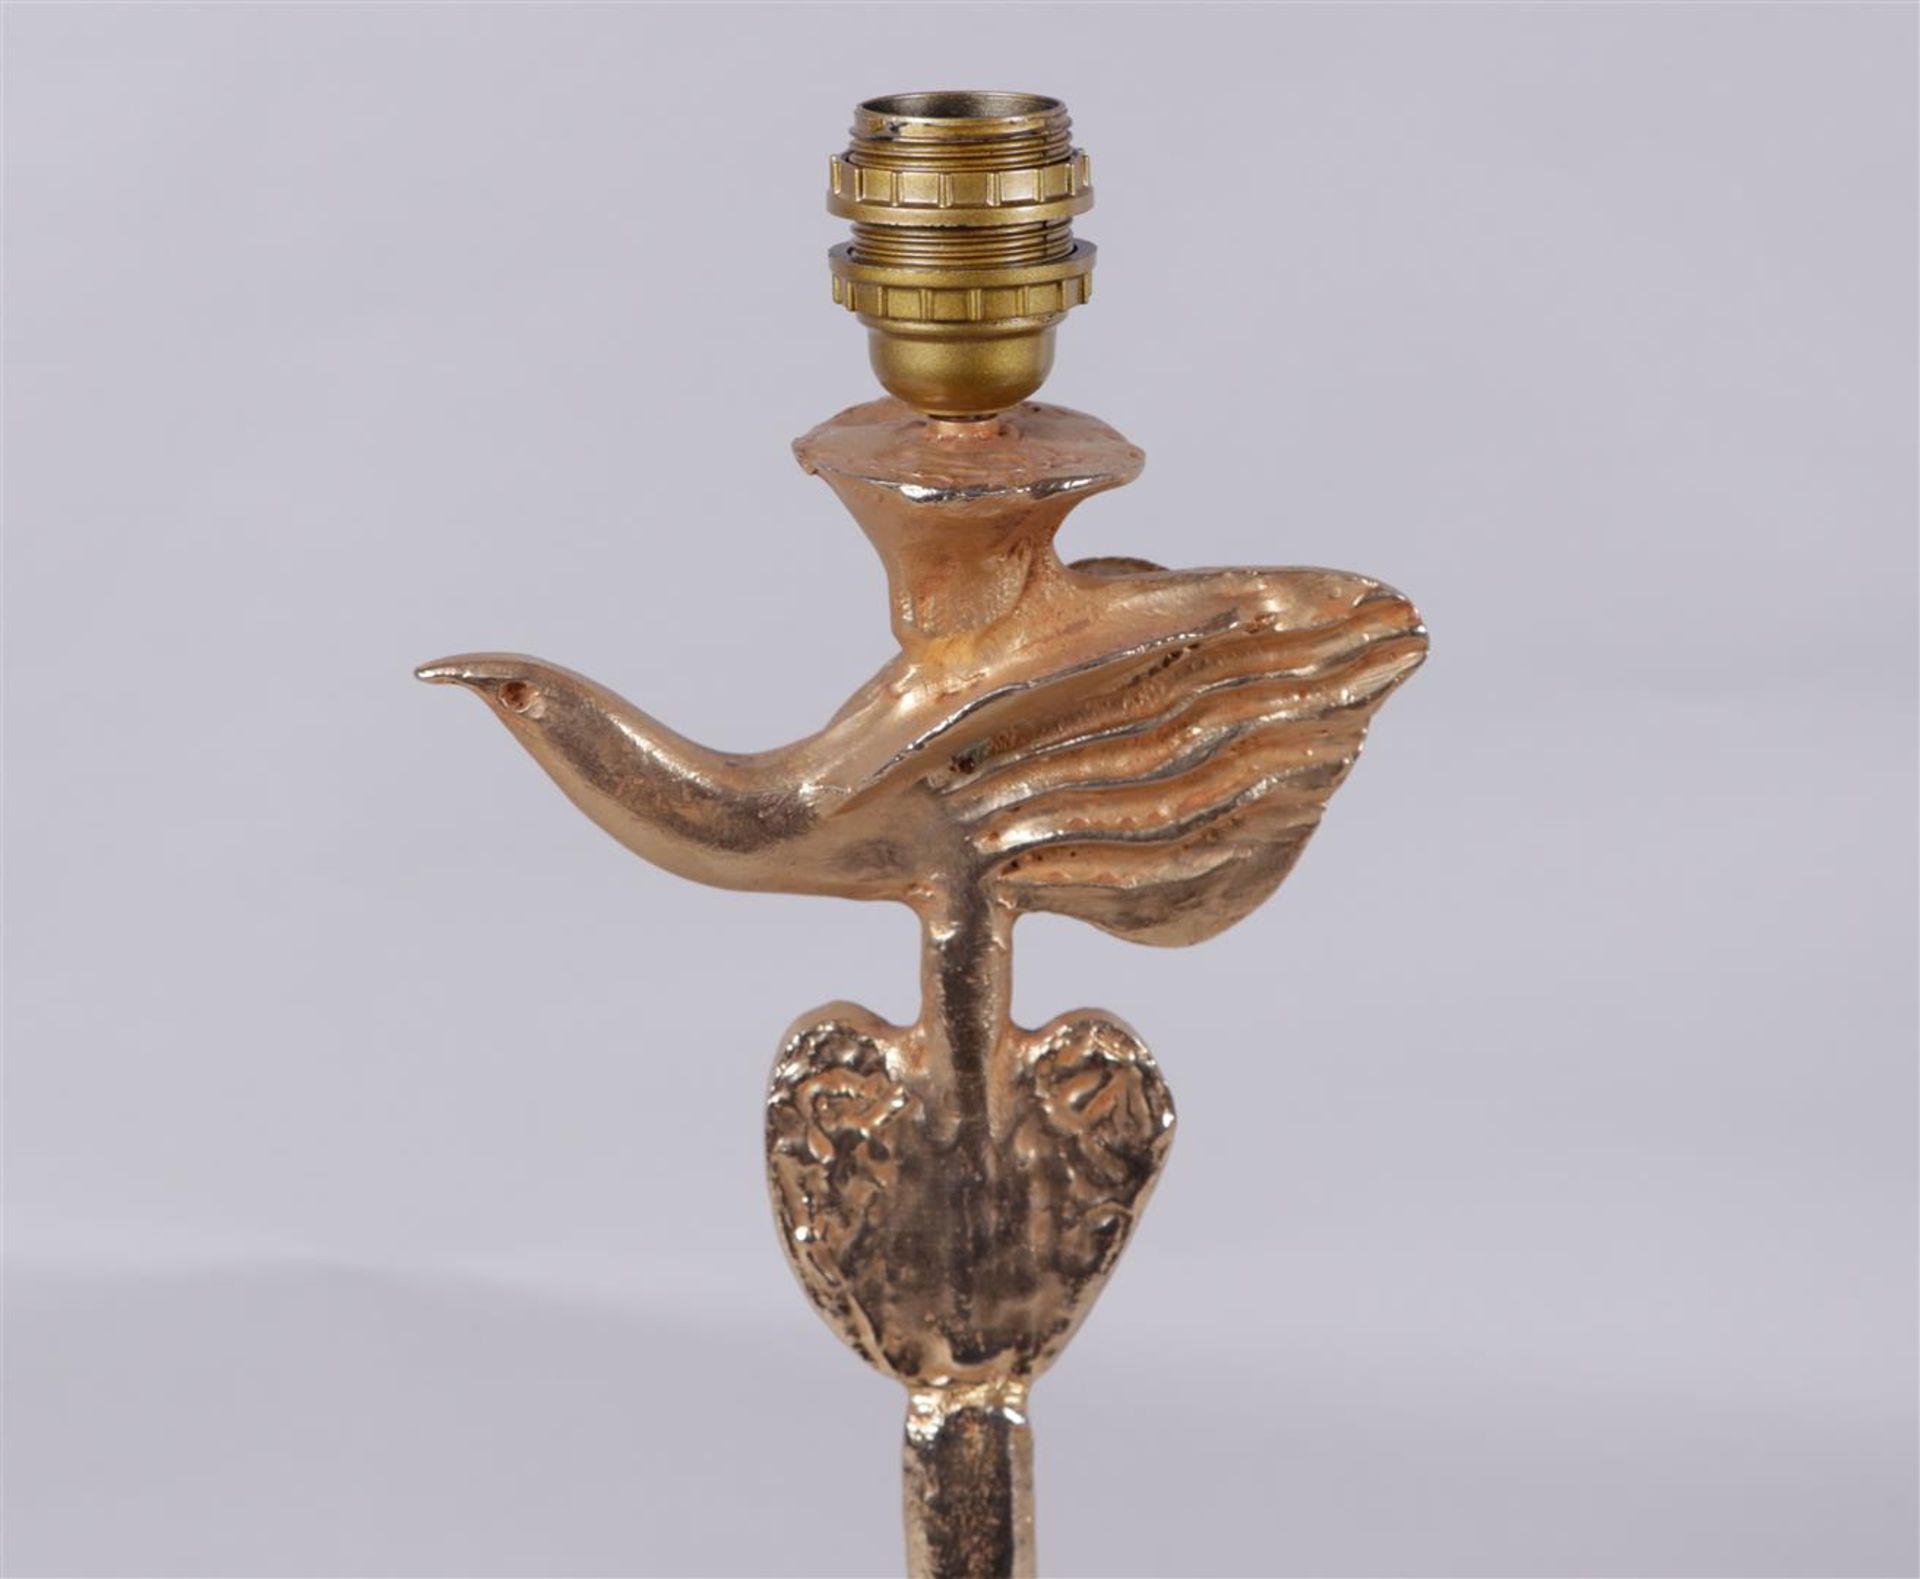 Pierre Casenove for Fondica, 'bird' gold-plated lamp. Signed on the base.
H. 45 cm. - Image 2 of 4